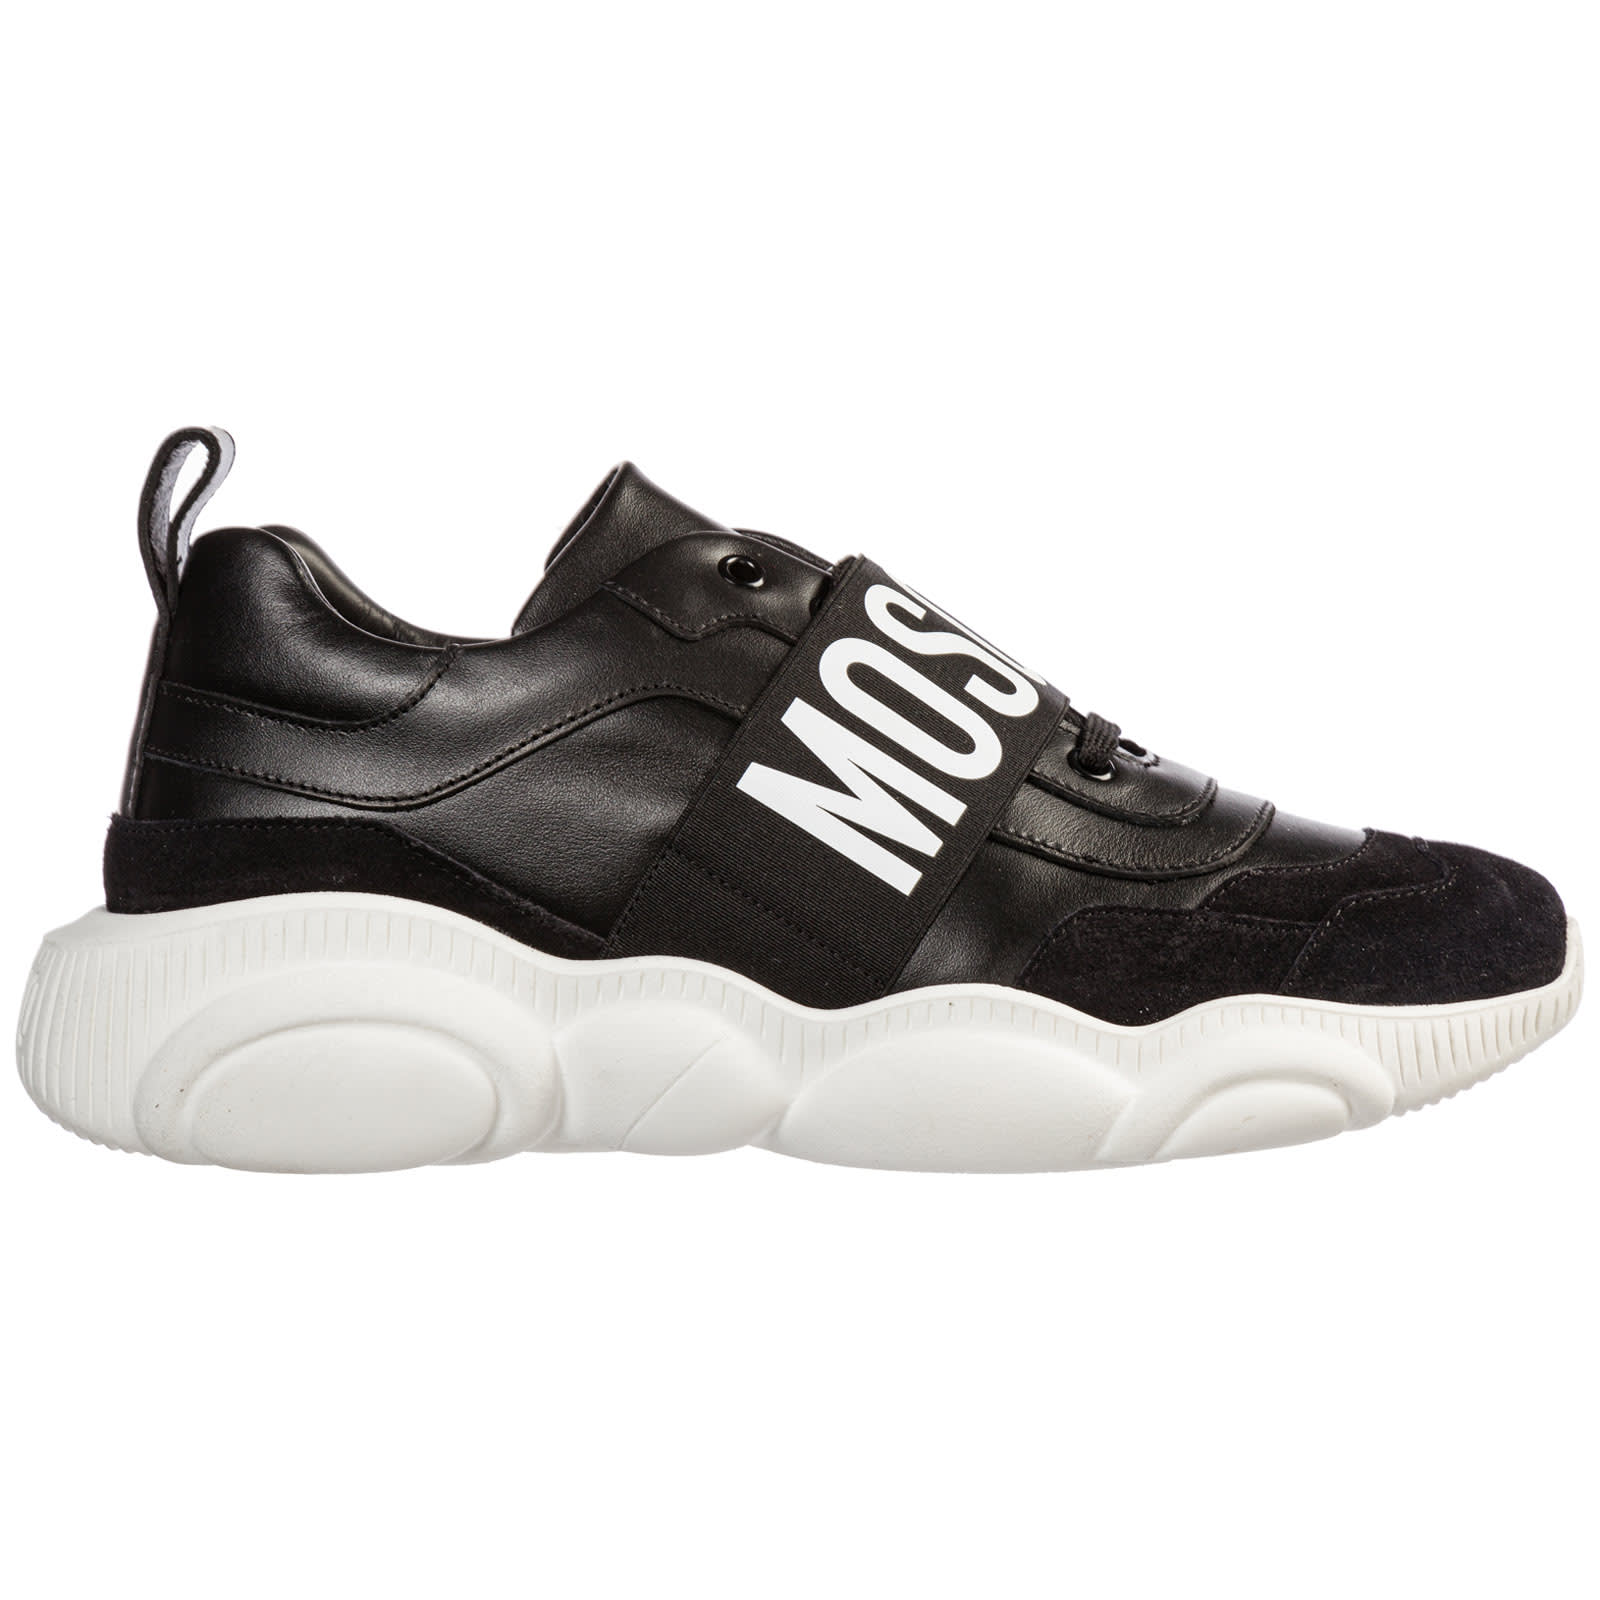 Moschino Moschino Shoes Leather Trainers Sneakers Teddy Run - Nero ...